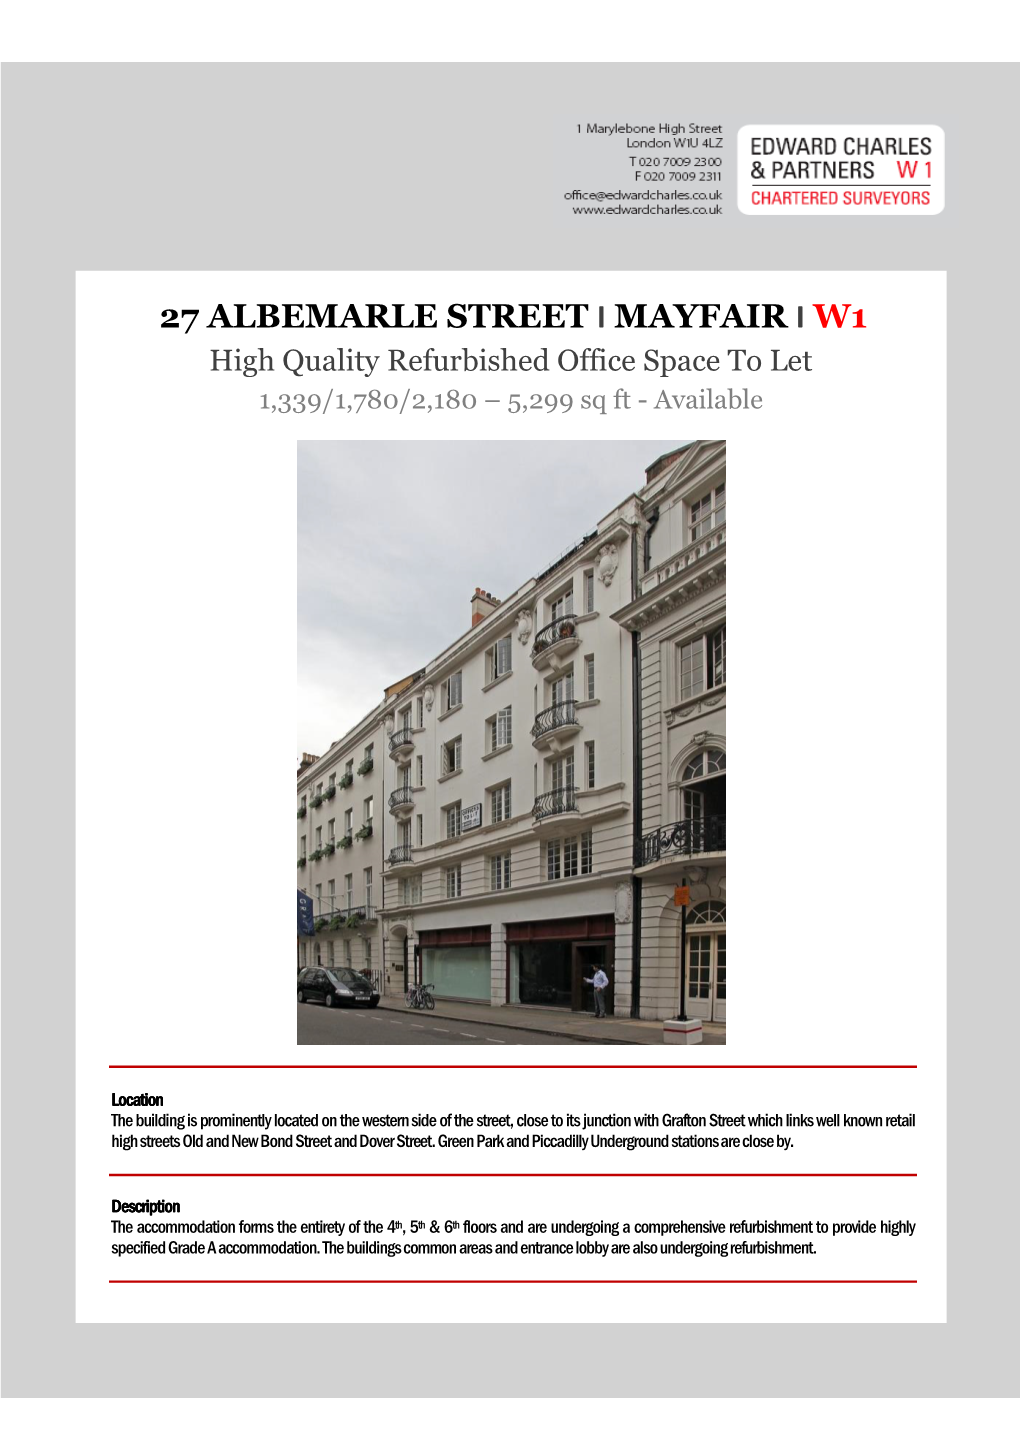 27 ALBEMARLE STREET I MAYFAIR I W1 High Quality Refurbished Office Space to Let 1,339/1,780/2,180 – 5,299 Sq Ft - Available